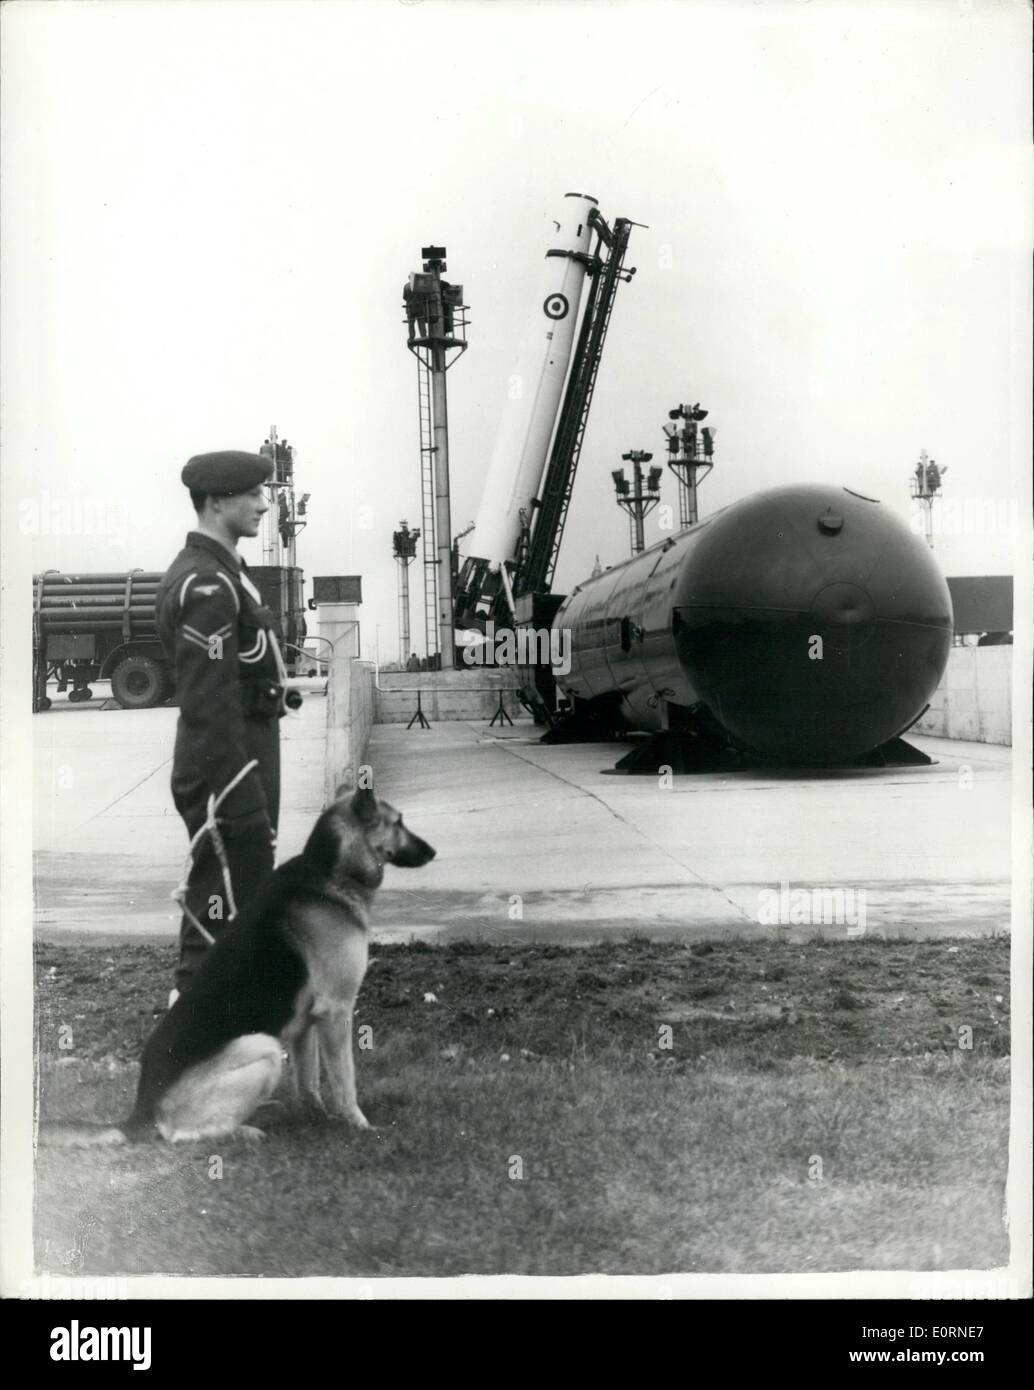 Feb. 02, 1960 - Press Visit to R.A.F. Feltwell - Thor Ballistic Missile Base. On the Launching Pad.: A press visit was made today to R.A.F. feltwell - Thor intermediate - range ballistic missile base. The thor is now able to take its places as part of the operational front - line of the Royal Air Force. Photo shows The rocket raised on the launching pad - showing in foreground - the Liquid Oxygen tanks which supply the fuel - at R.A.F. Feltwell today. Stock Photo